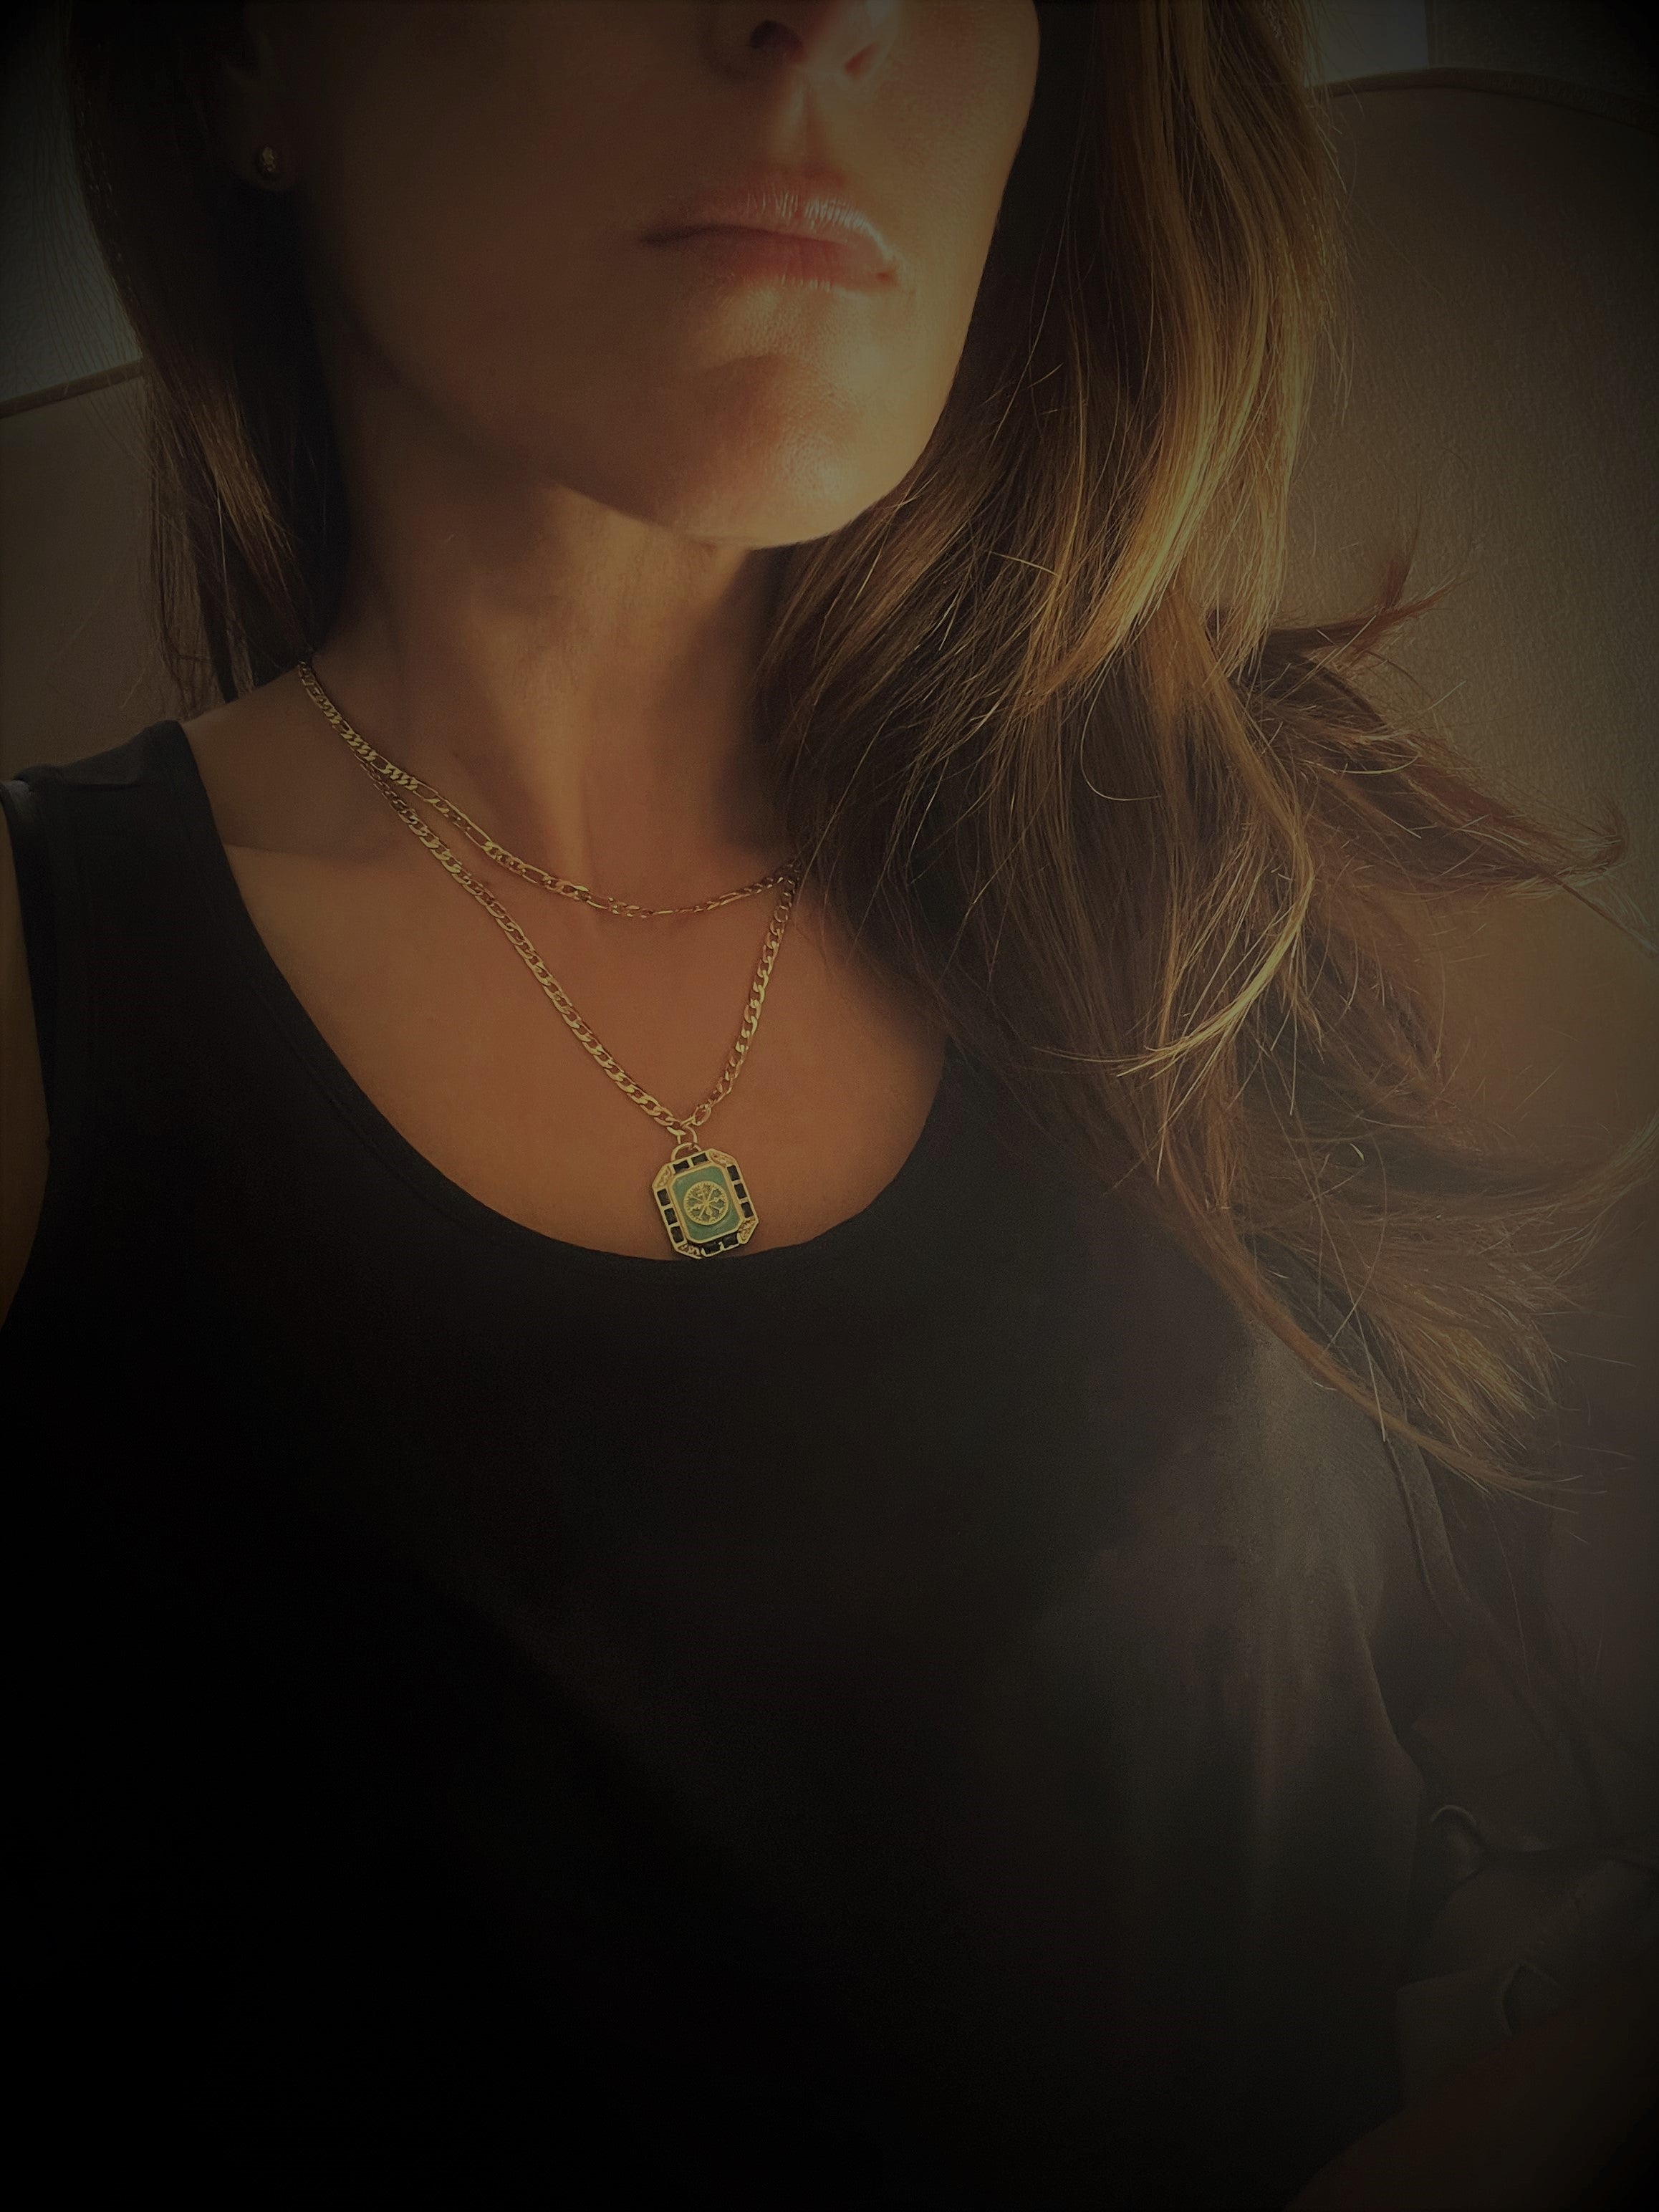 Emerald Compass Tag Necklace